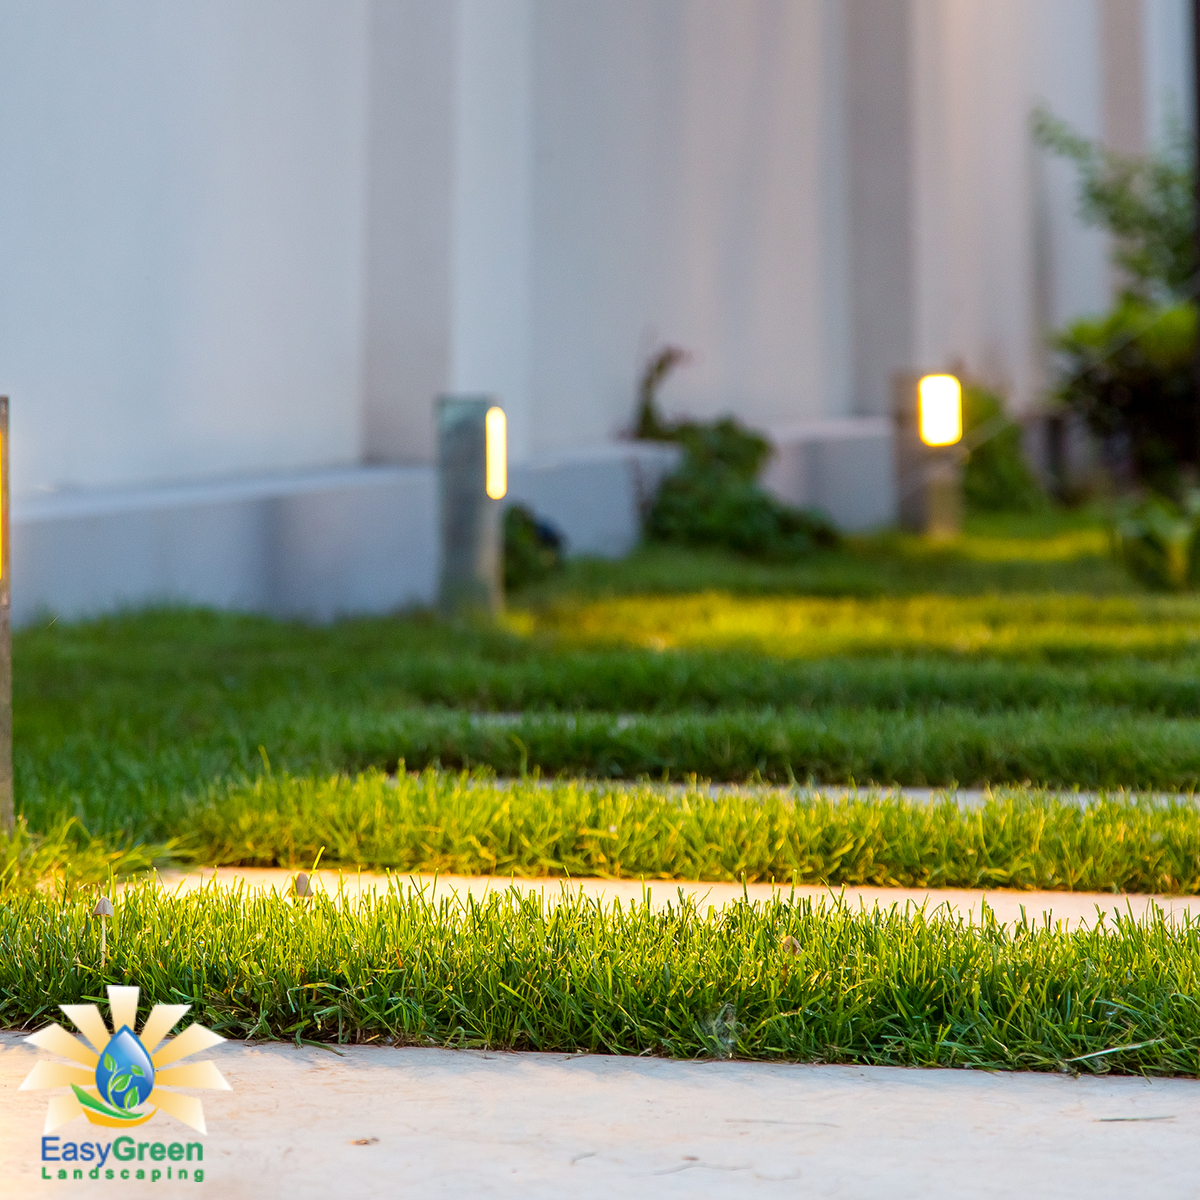 Why Hire A Landscaping Lighting Design Company For Your Duvall Property?